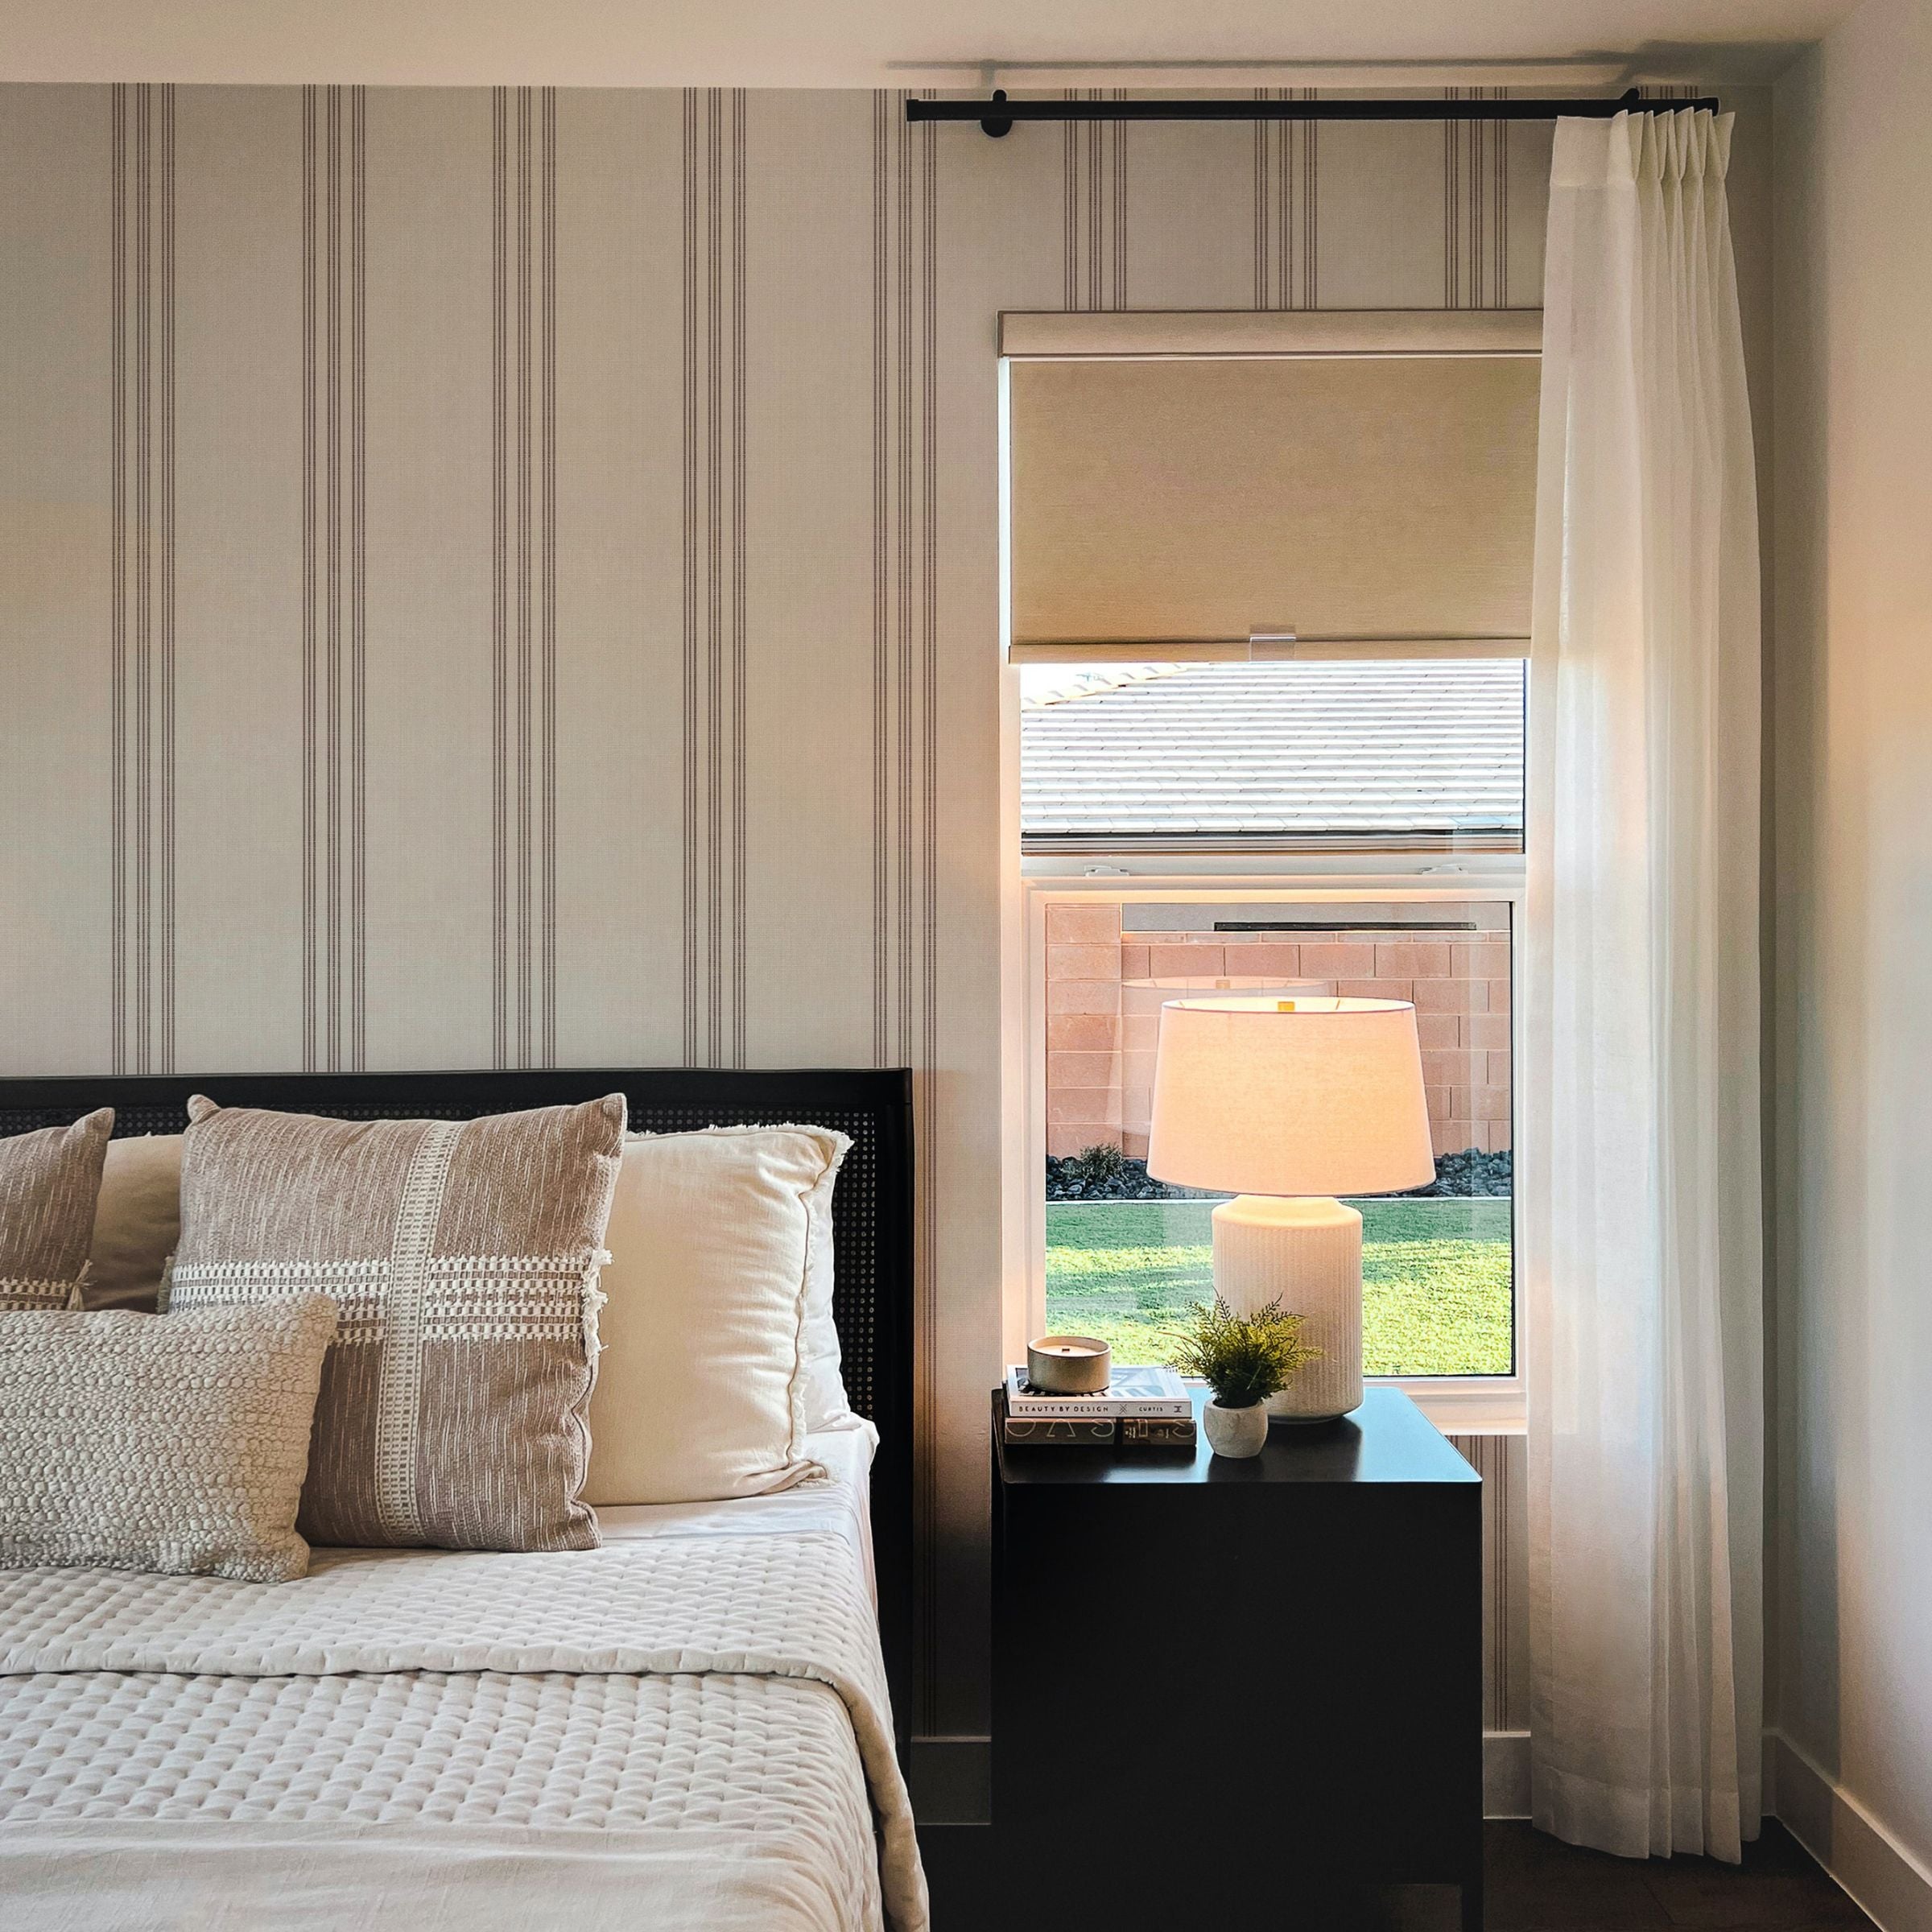 A cozy bedroom corner where the Fabric 5F Wallpaper provides a calming backdrop with its subtle ticking stripe pattern in gray on a neutral field. The wallpaper gives the illusion of fabric on the walls, complementing the texture of the bedding and the warm glow from a bedside lamp, contributing to a warm and inviting atmosphere.